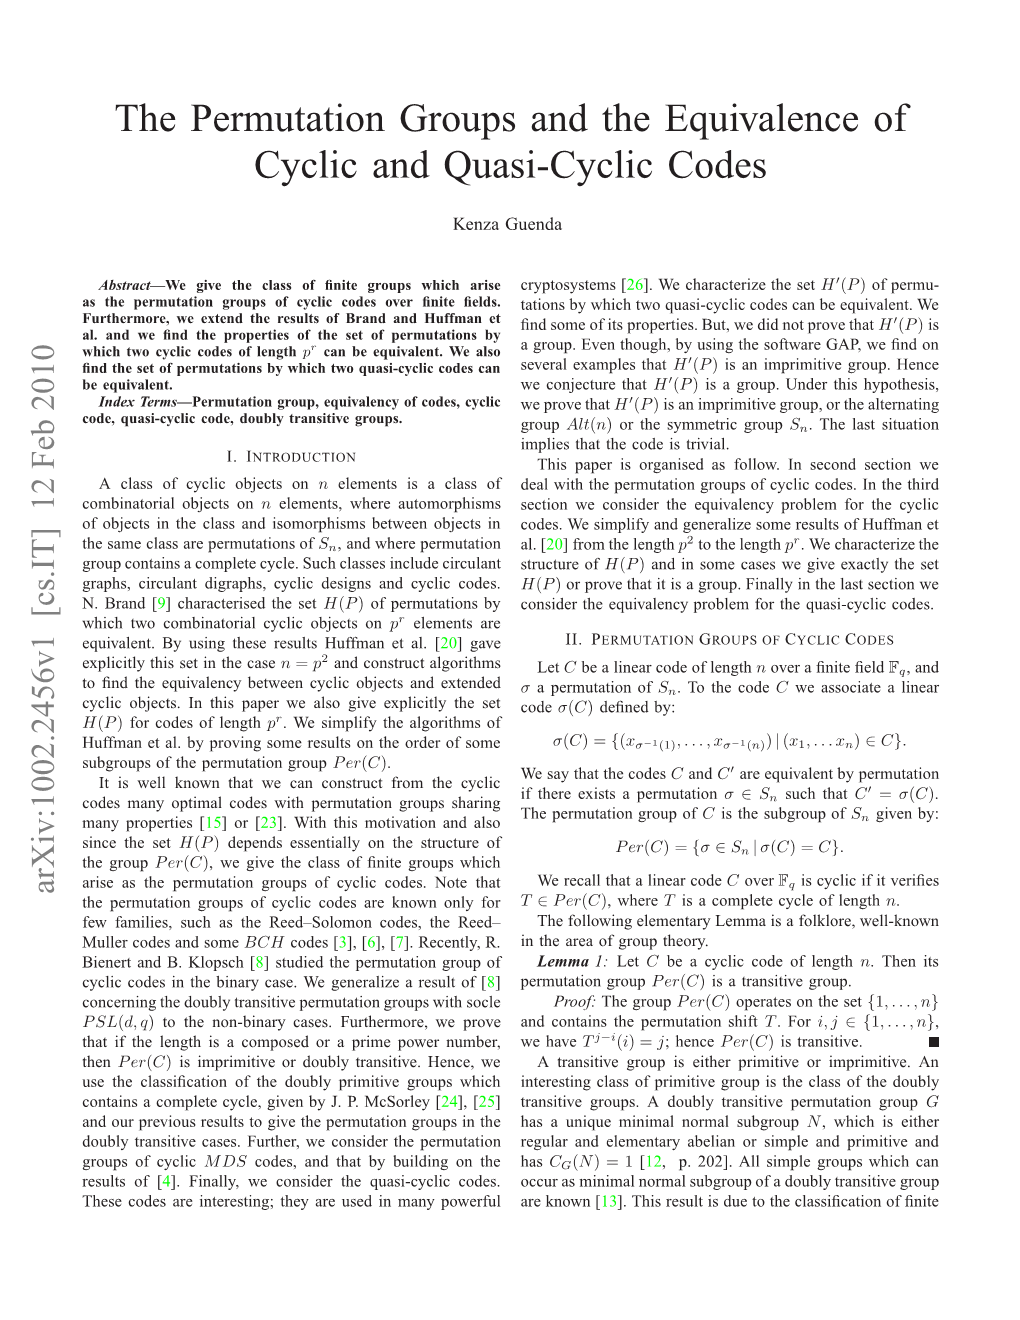 The Permutation Groups and the Equivalence of Cyclic and Quasi